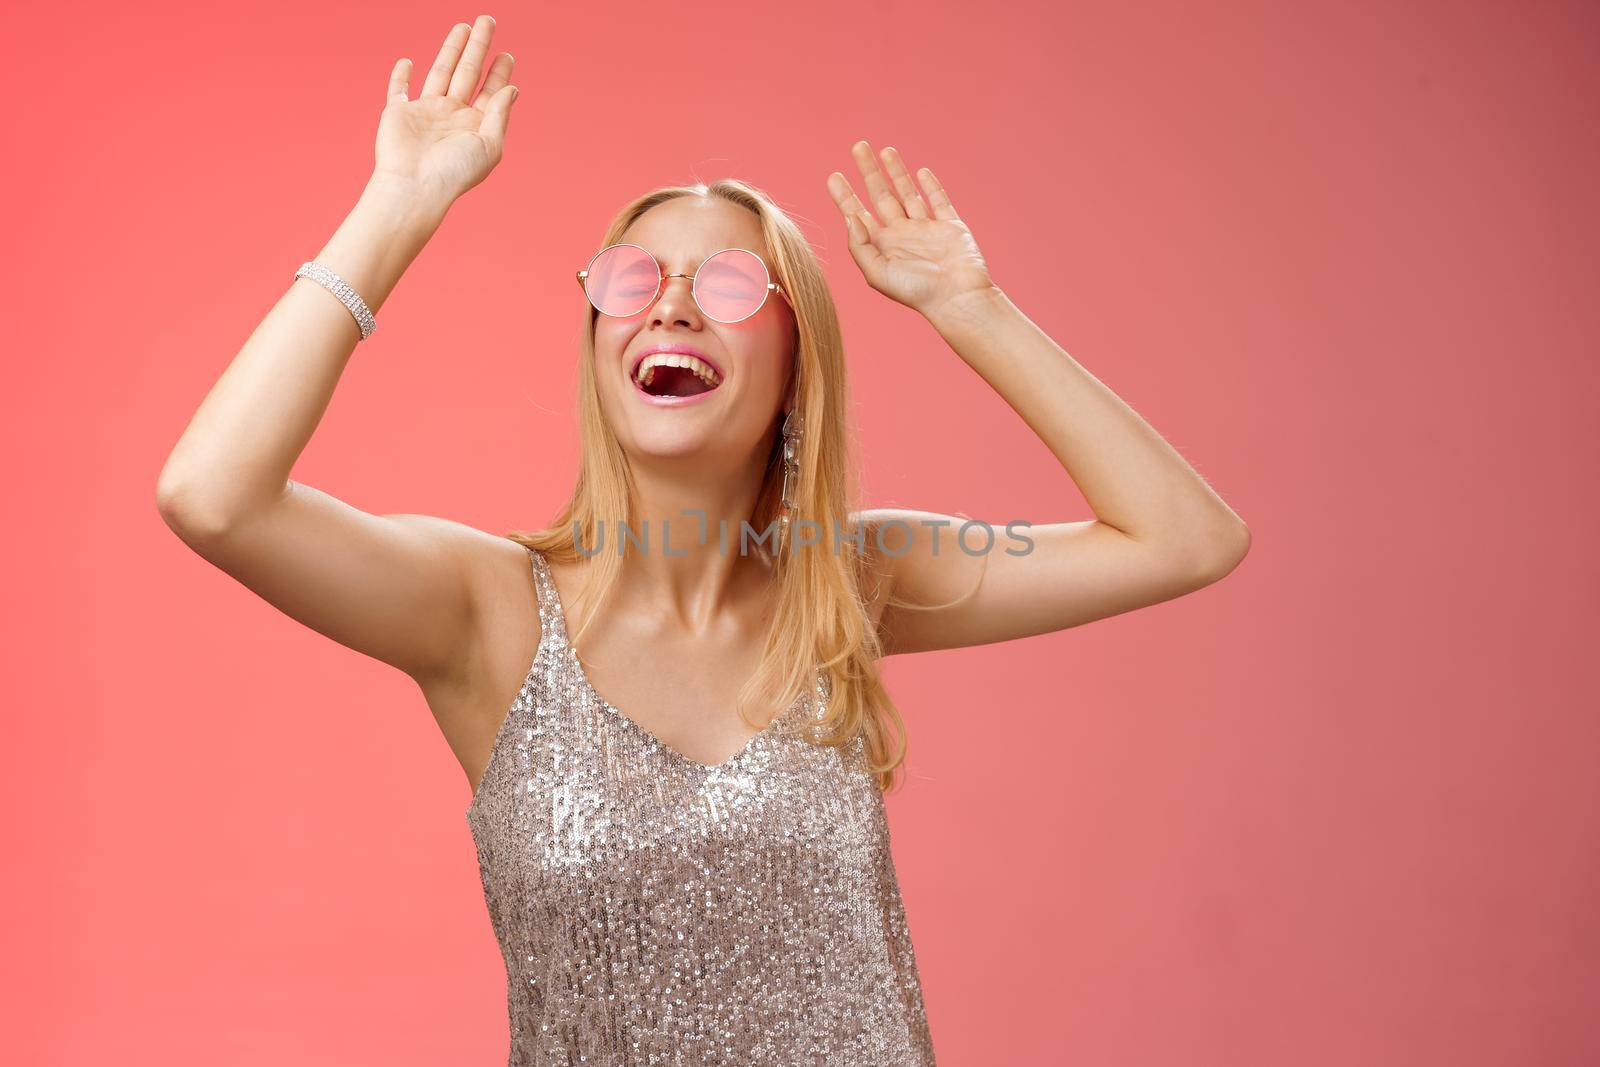 Excited chilling energized young blond woman in silver stylish glittering dress sunglasses raise hands up having fun dancing dance-floor nightclub throw party celebrate b-day, red background.